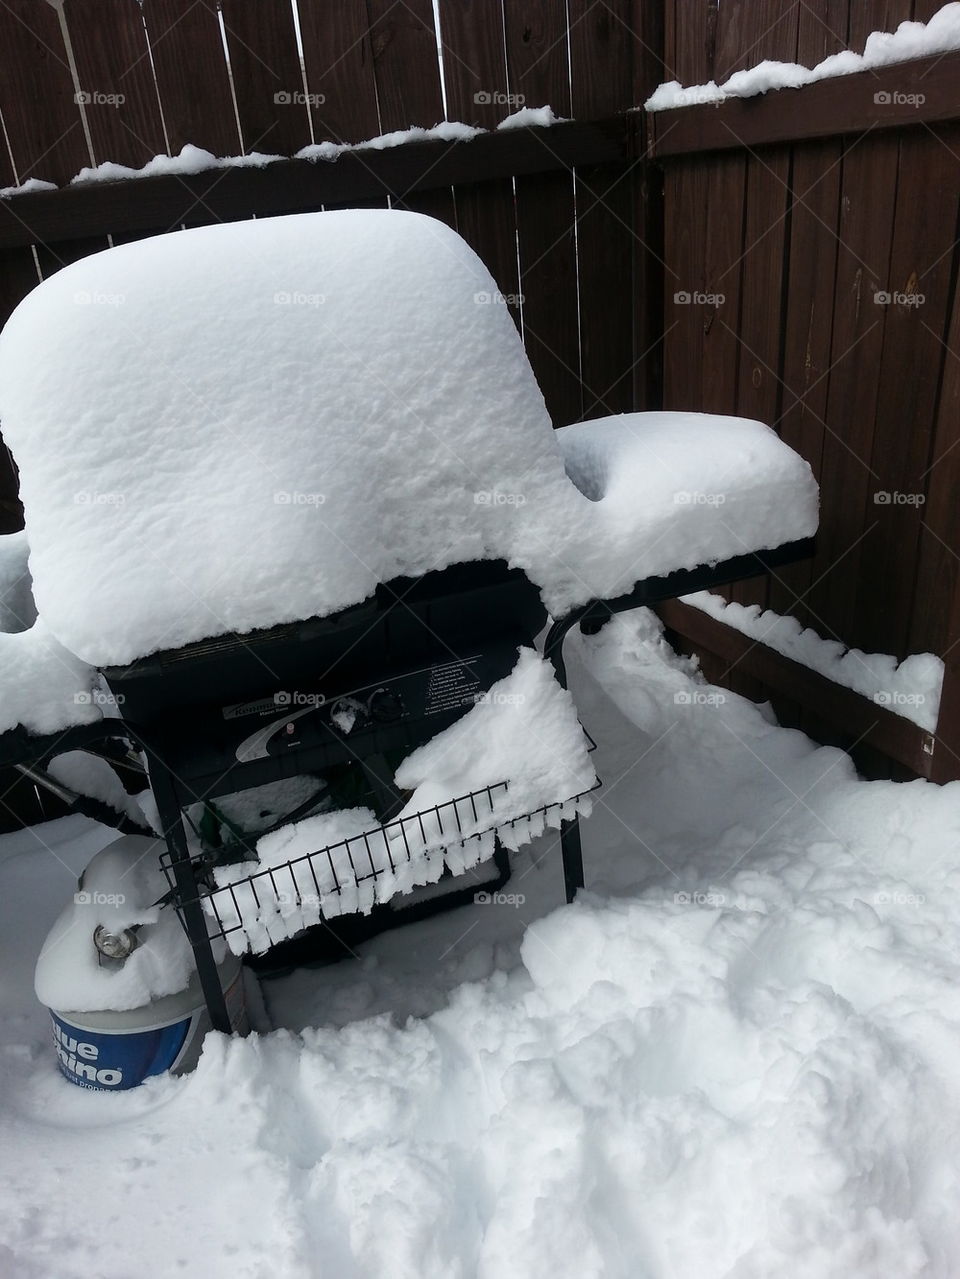 Grill covered in snow!